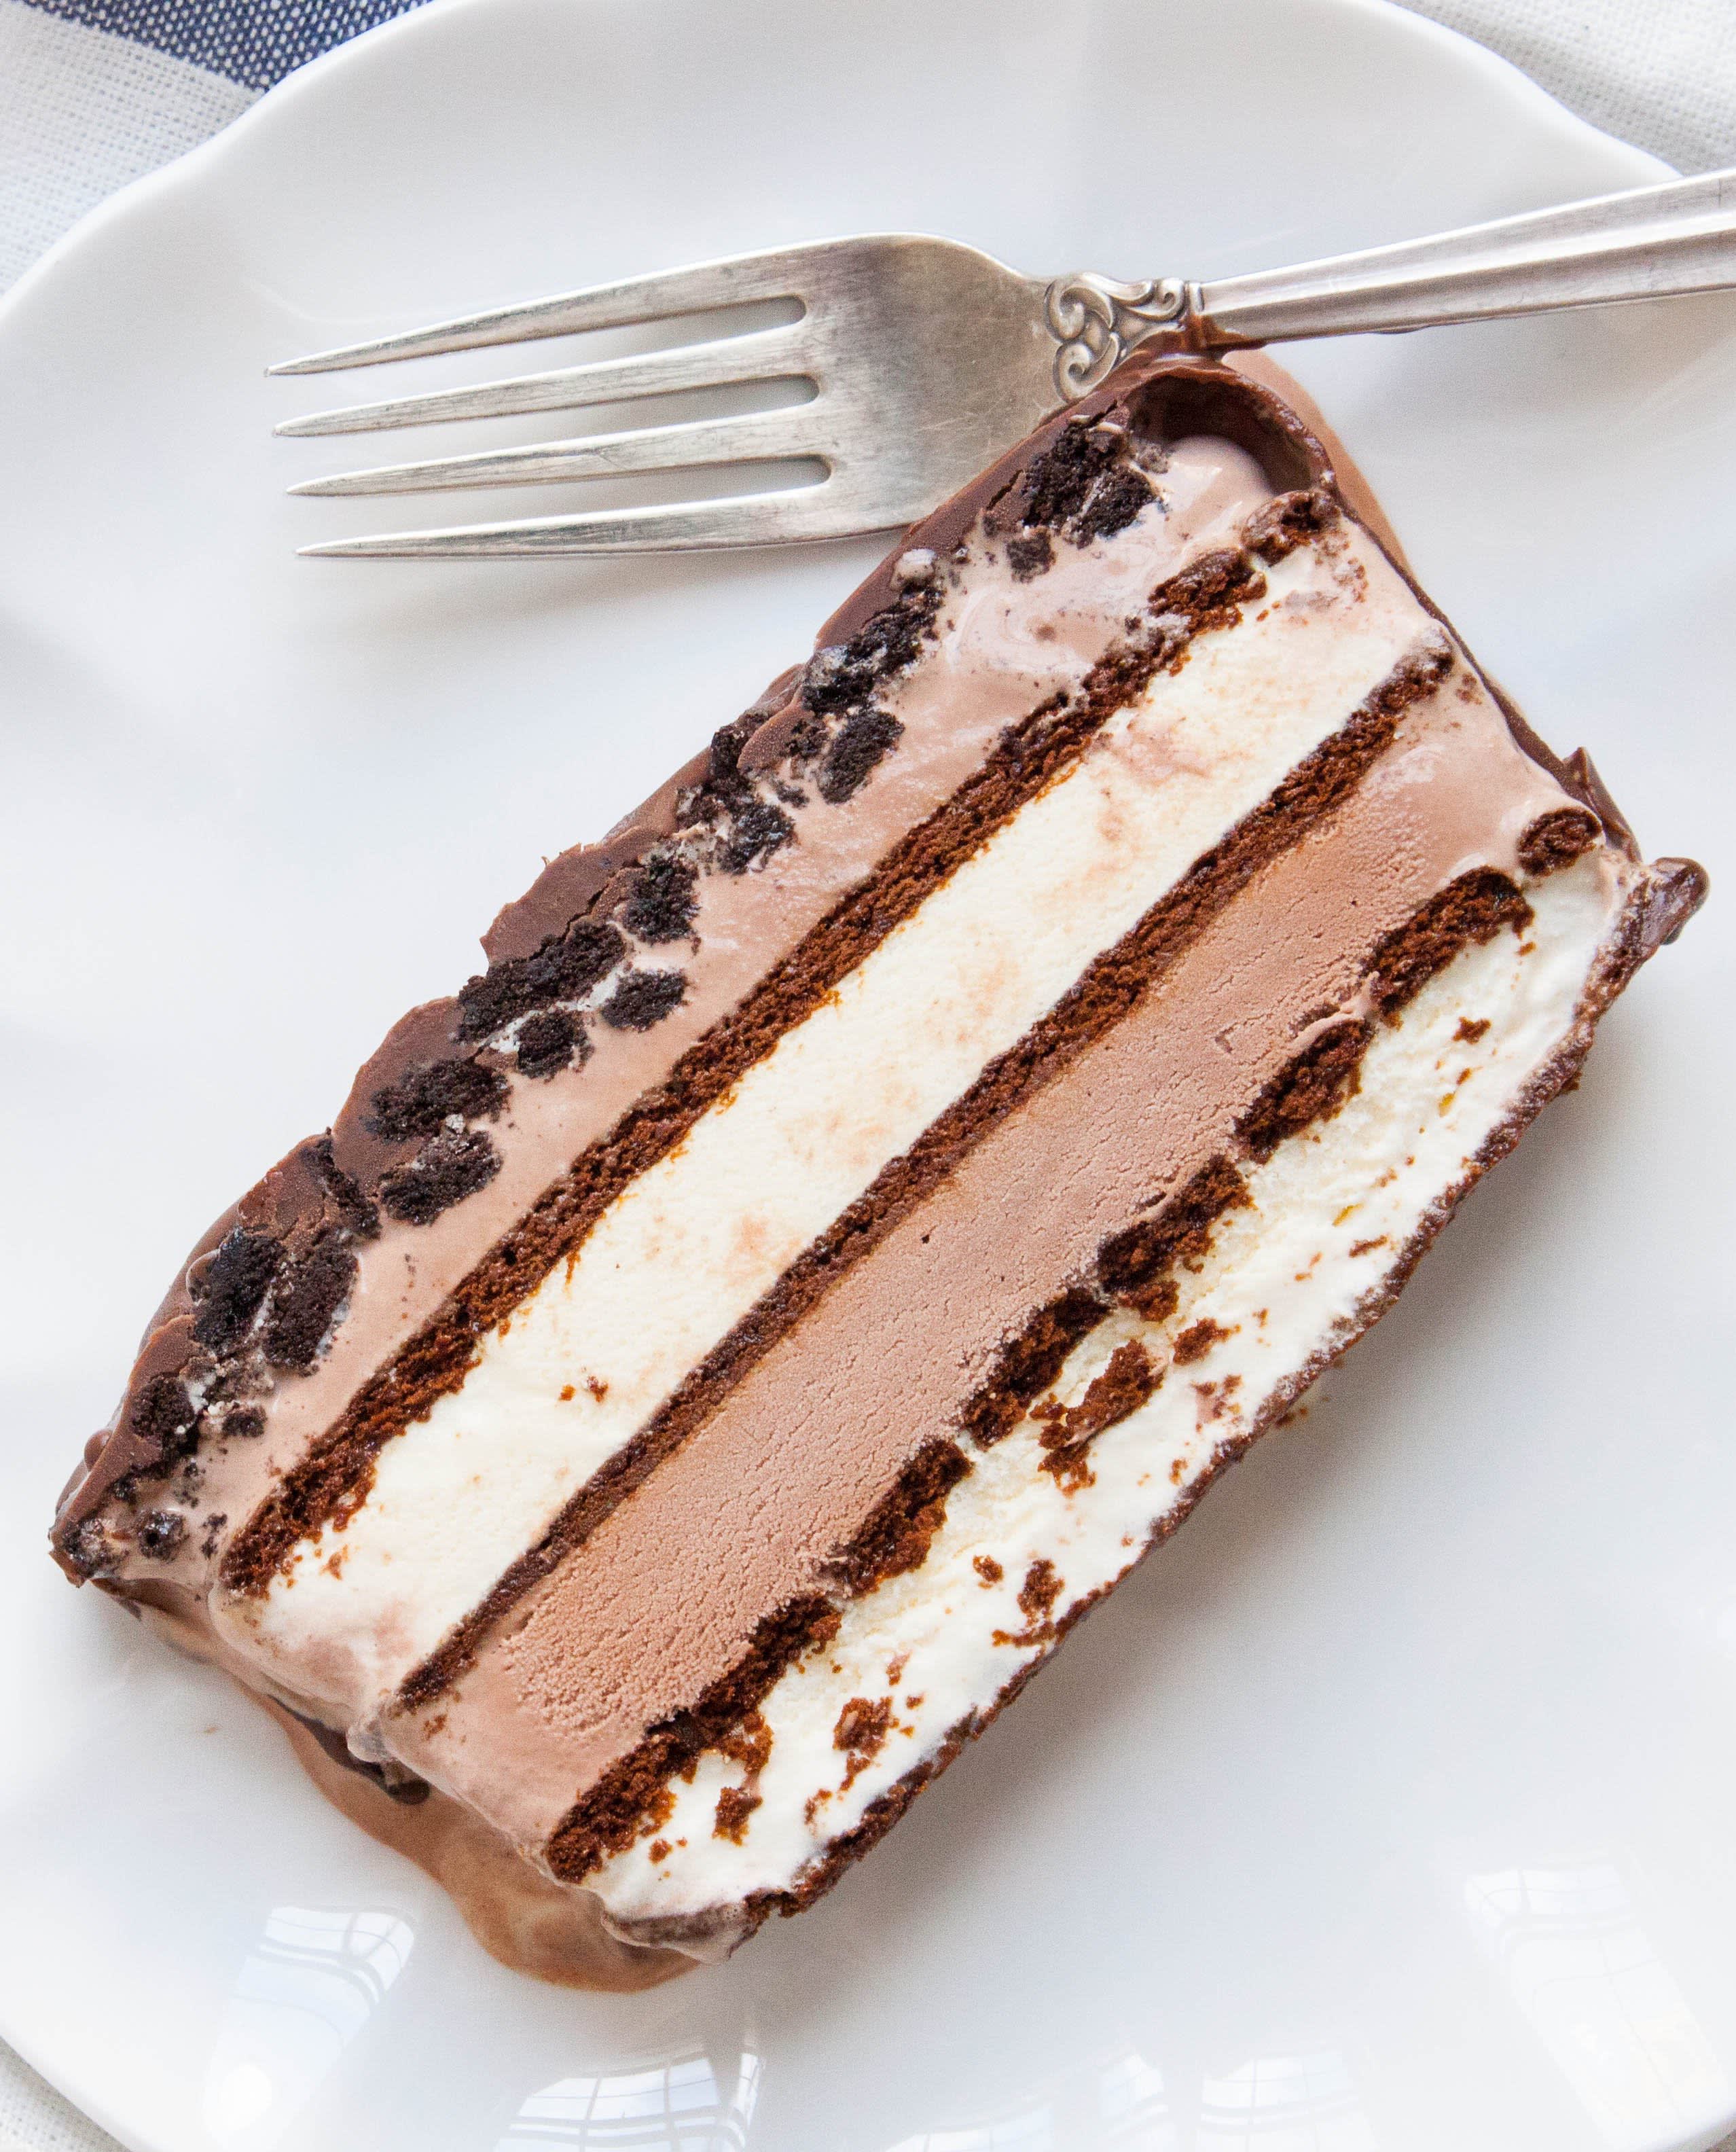 You Can Make This 10-Layer Ice Cream Cake in 5 Minutes | Kitchn